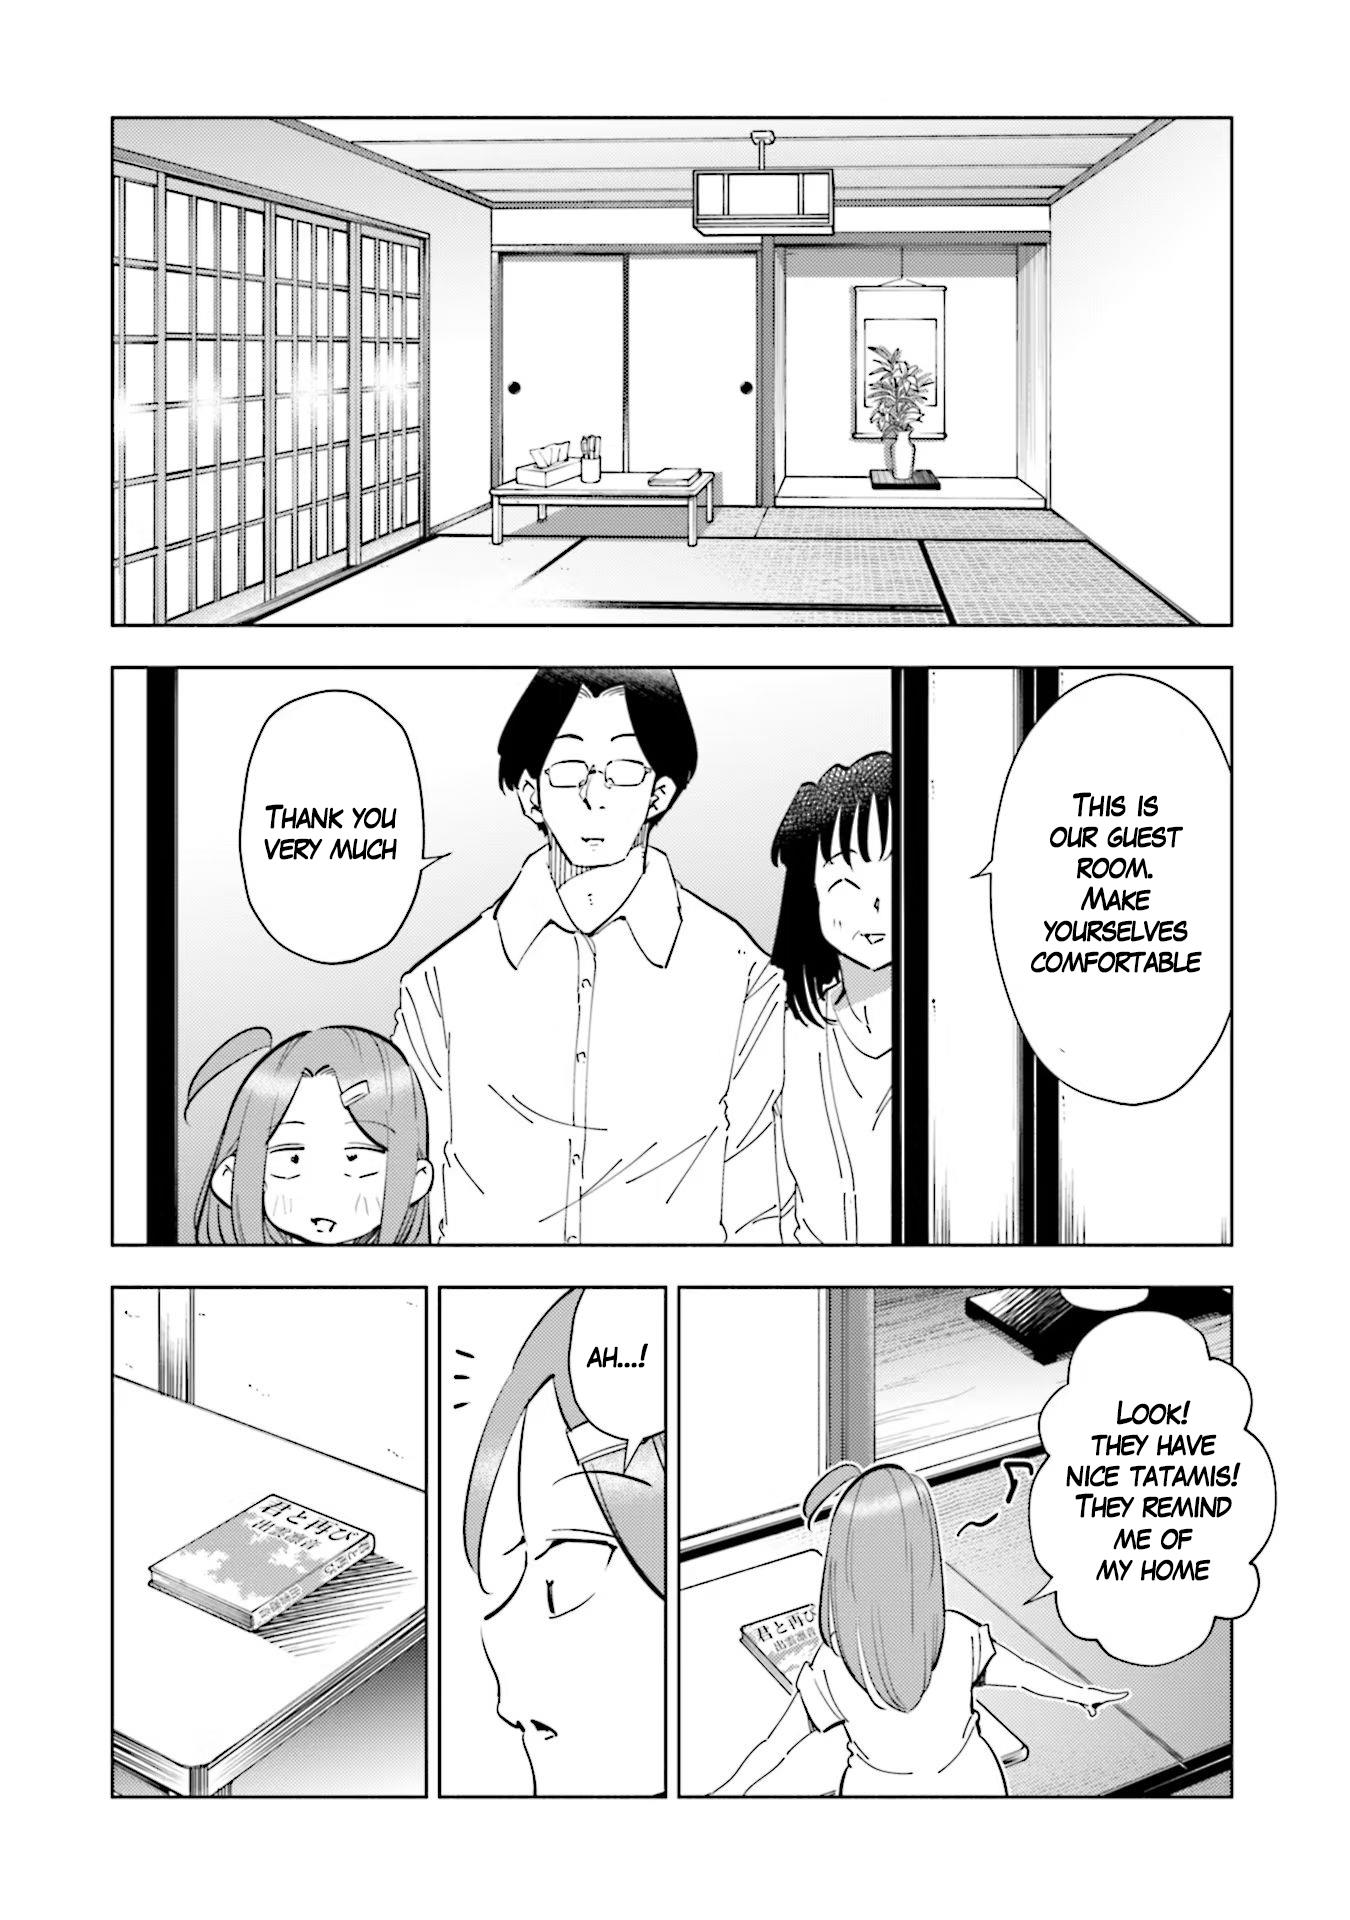 If My Wife Became An Elementary School Student - Page 1